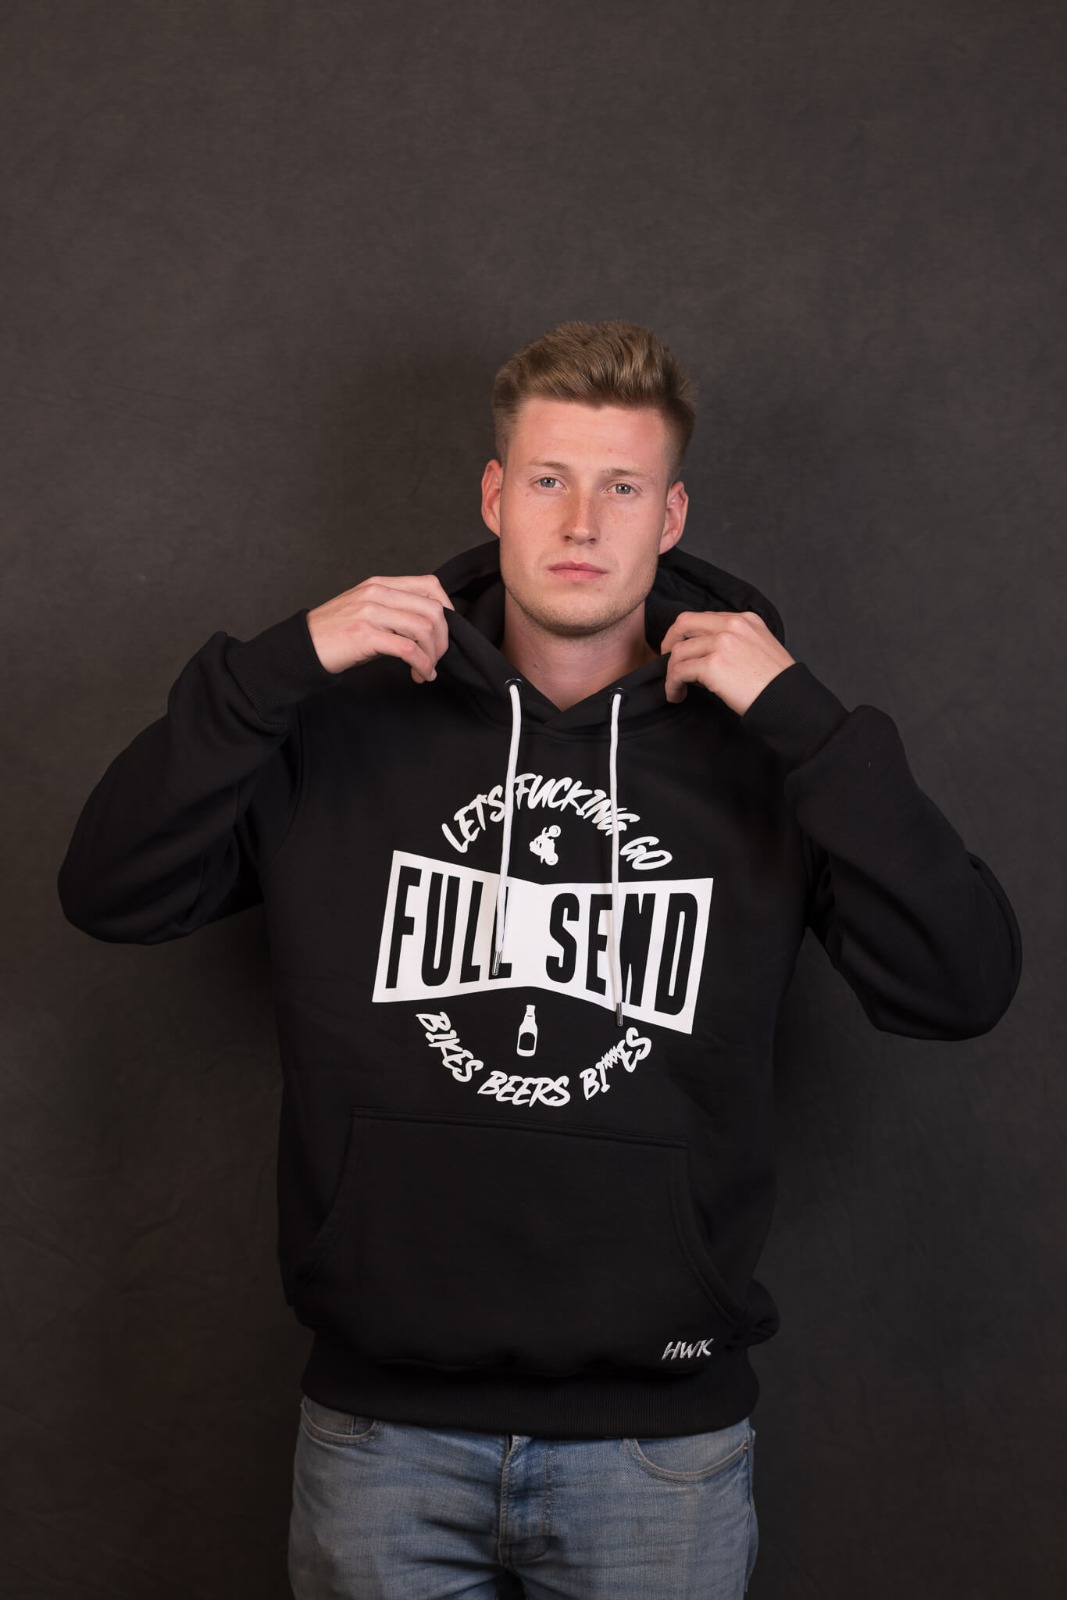 Fashionable Hoodies with Nelk Boys Merch and commedesstore